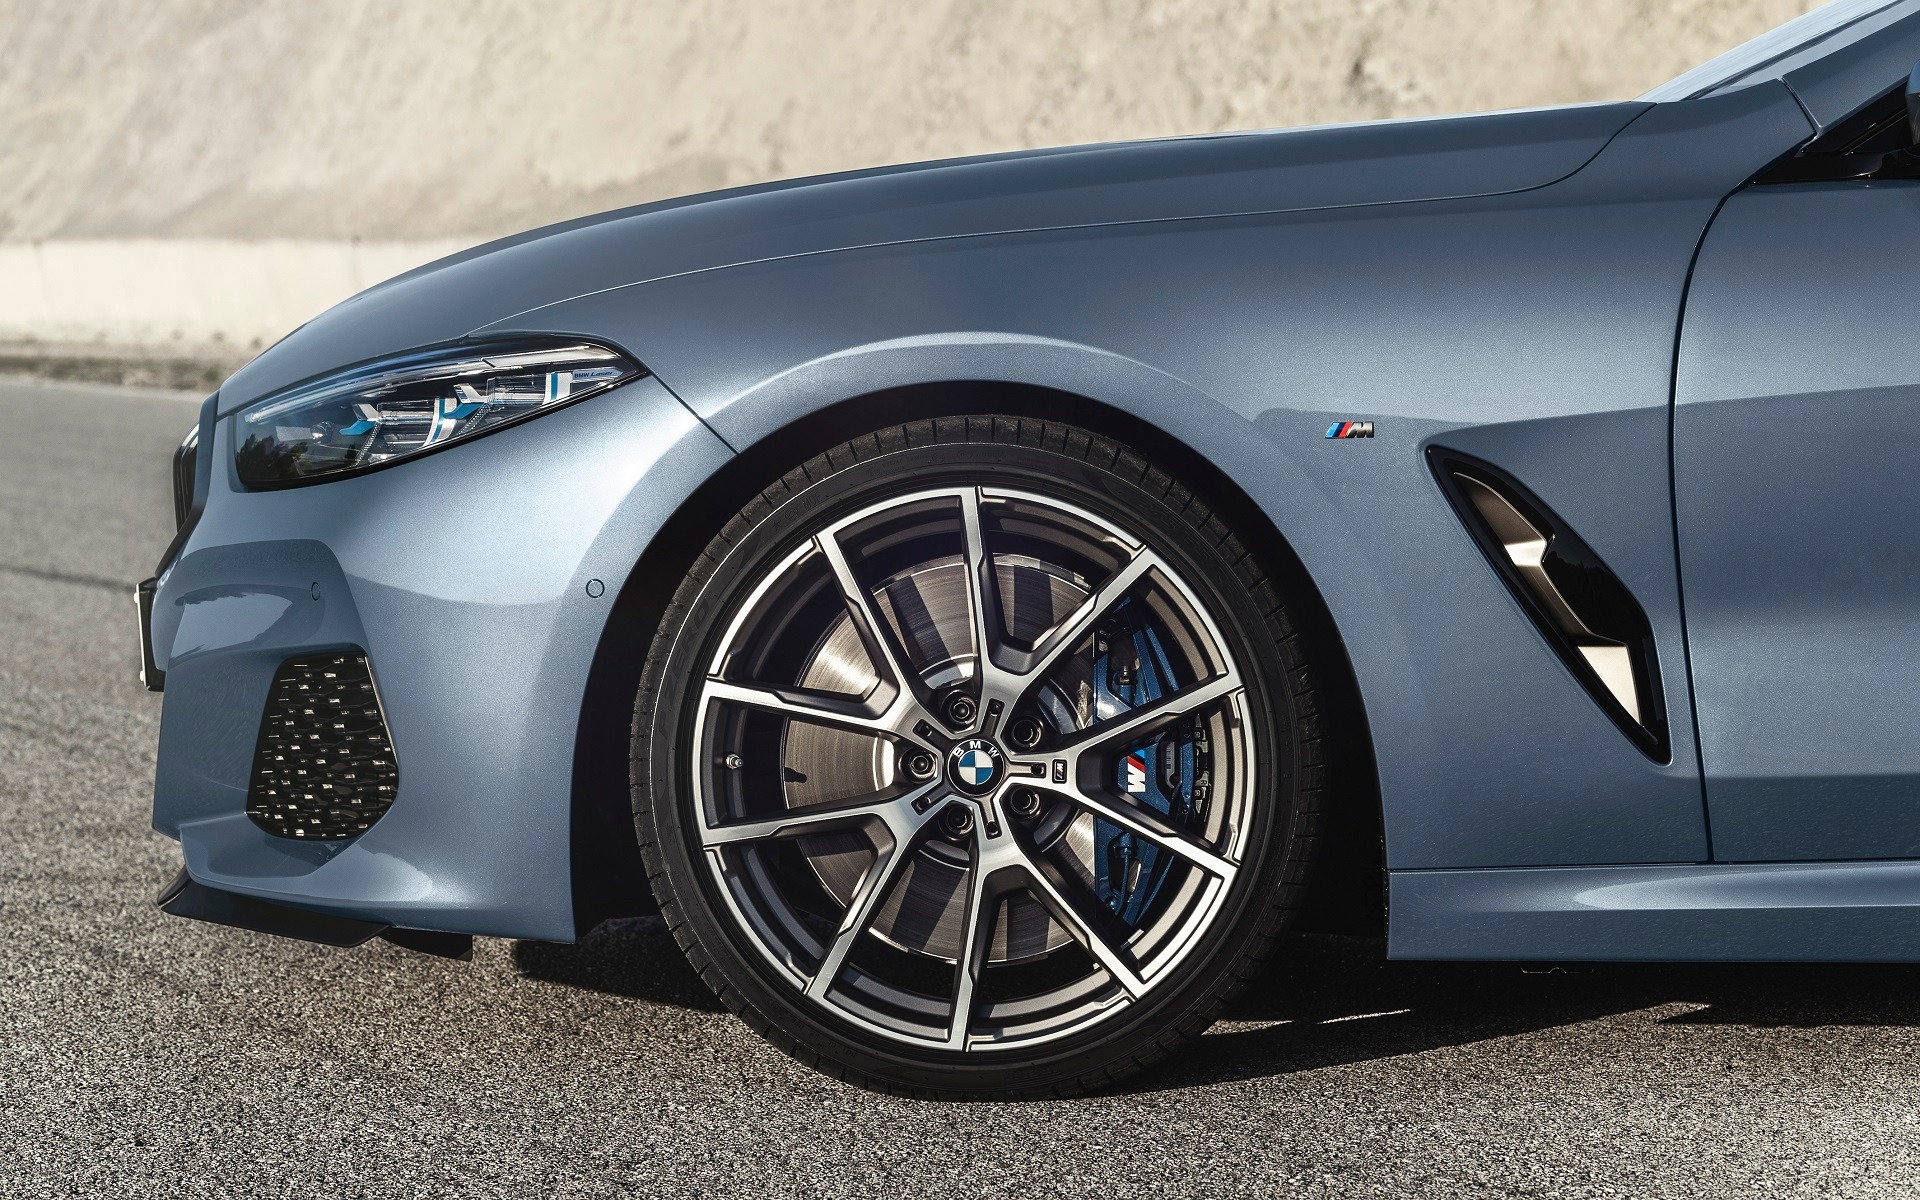 <p>2019 BMW 8 Series Coupe with 20-inch M alloy wheels</p>